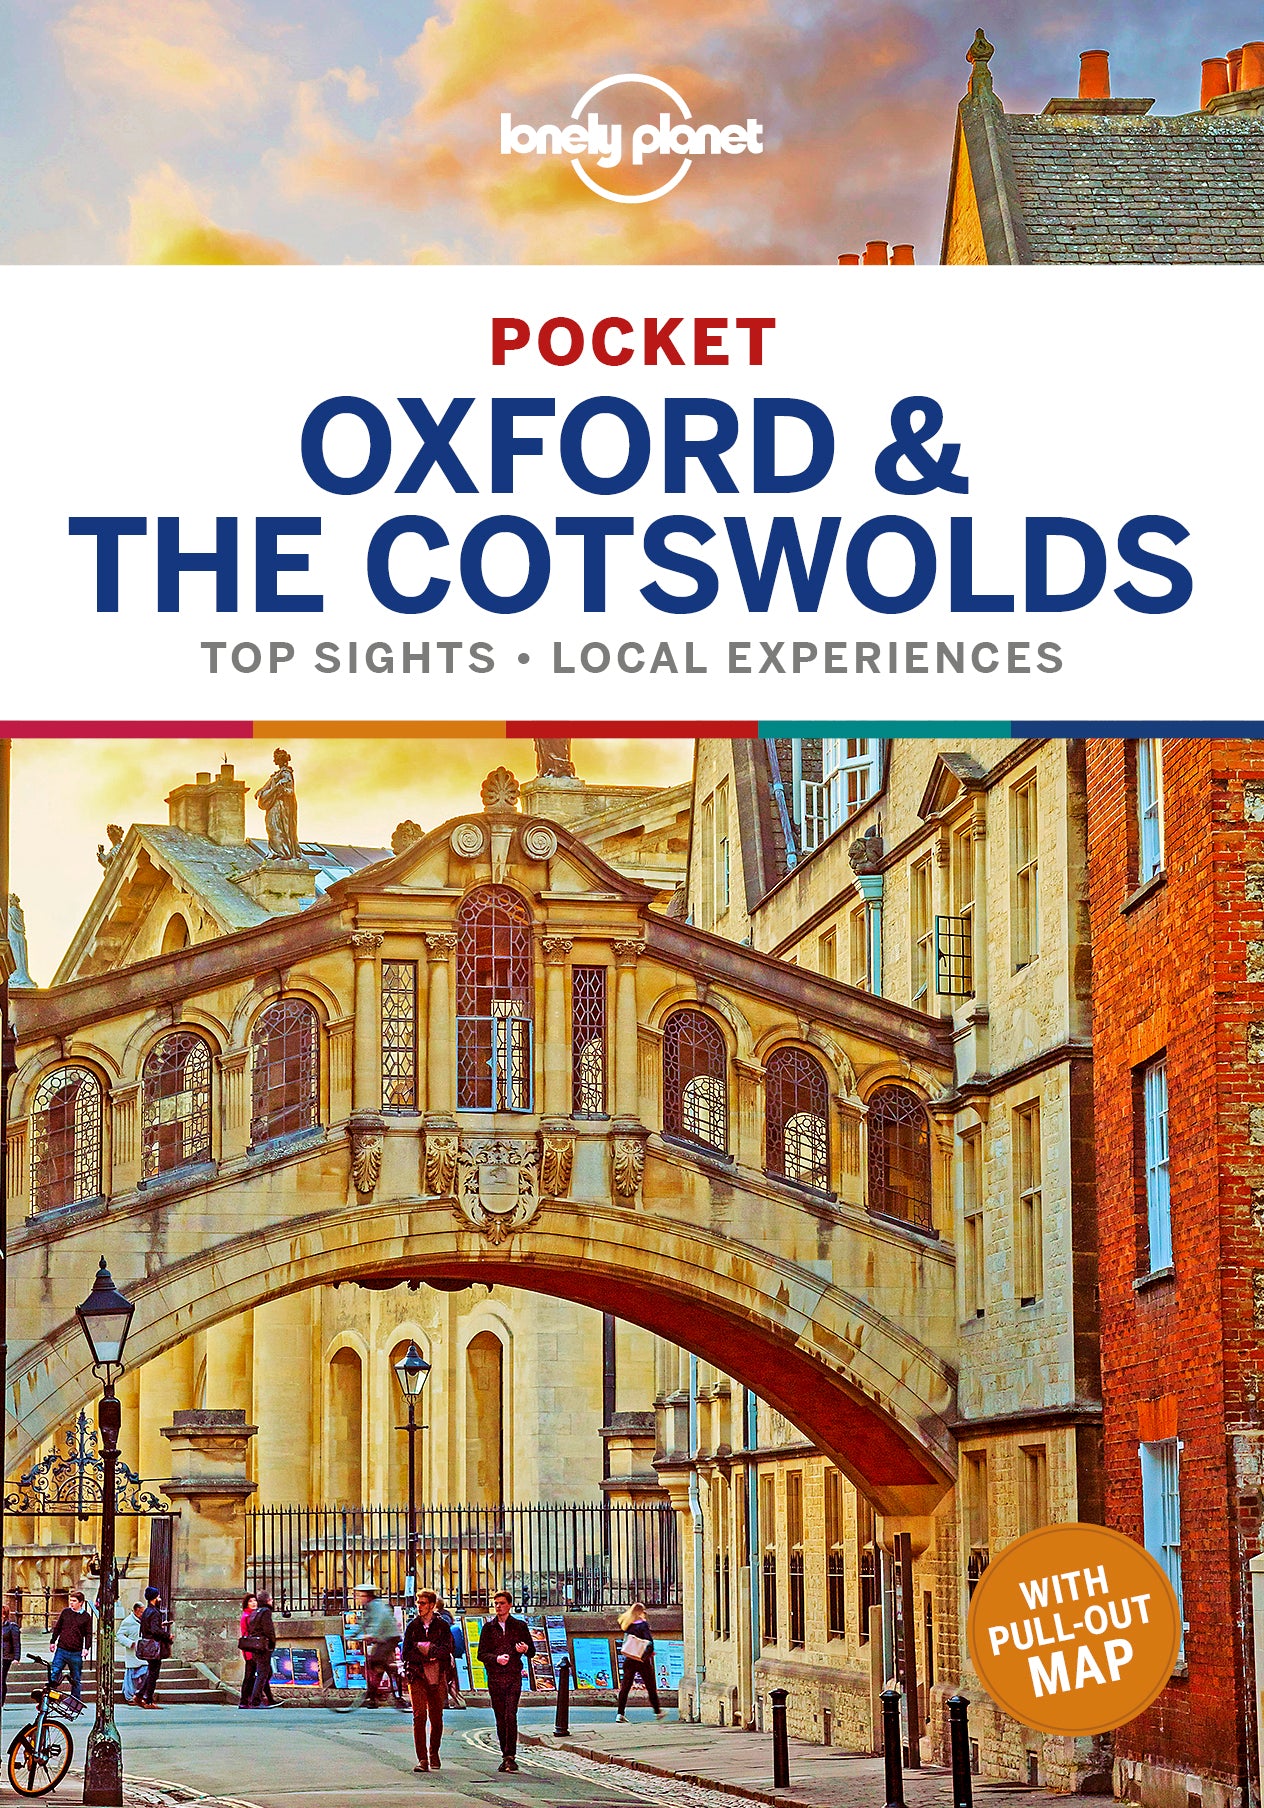 Pocket Oxford & the Cotswolds preview